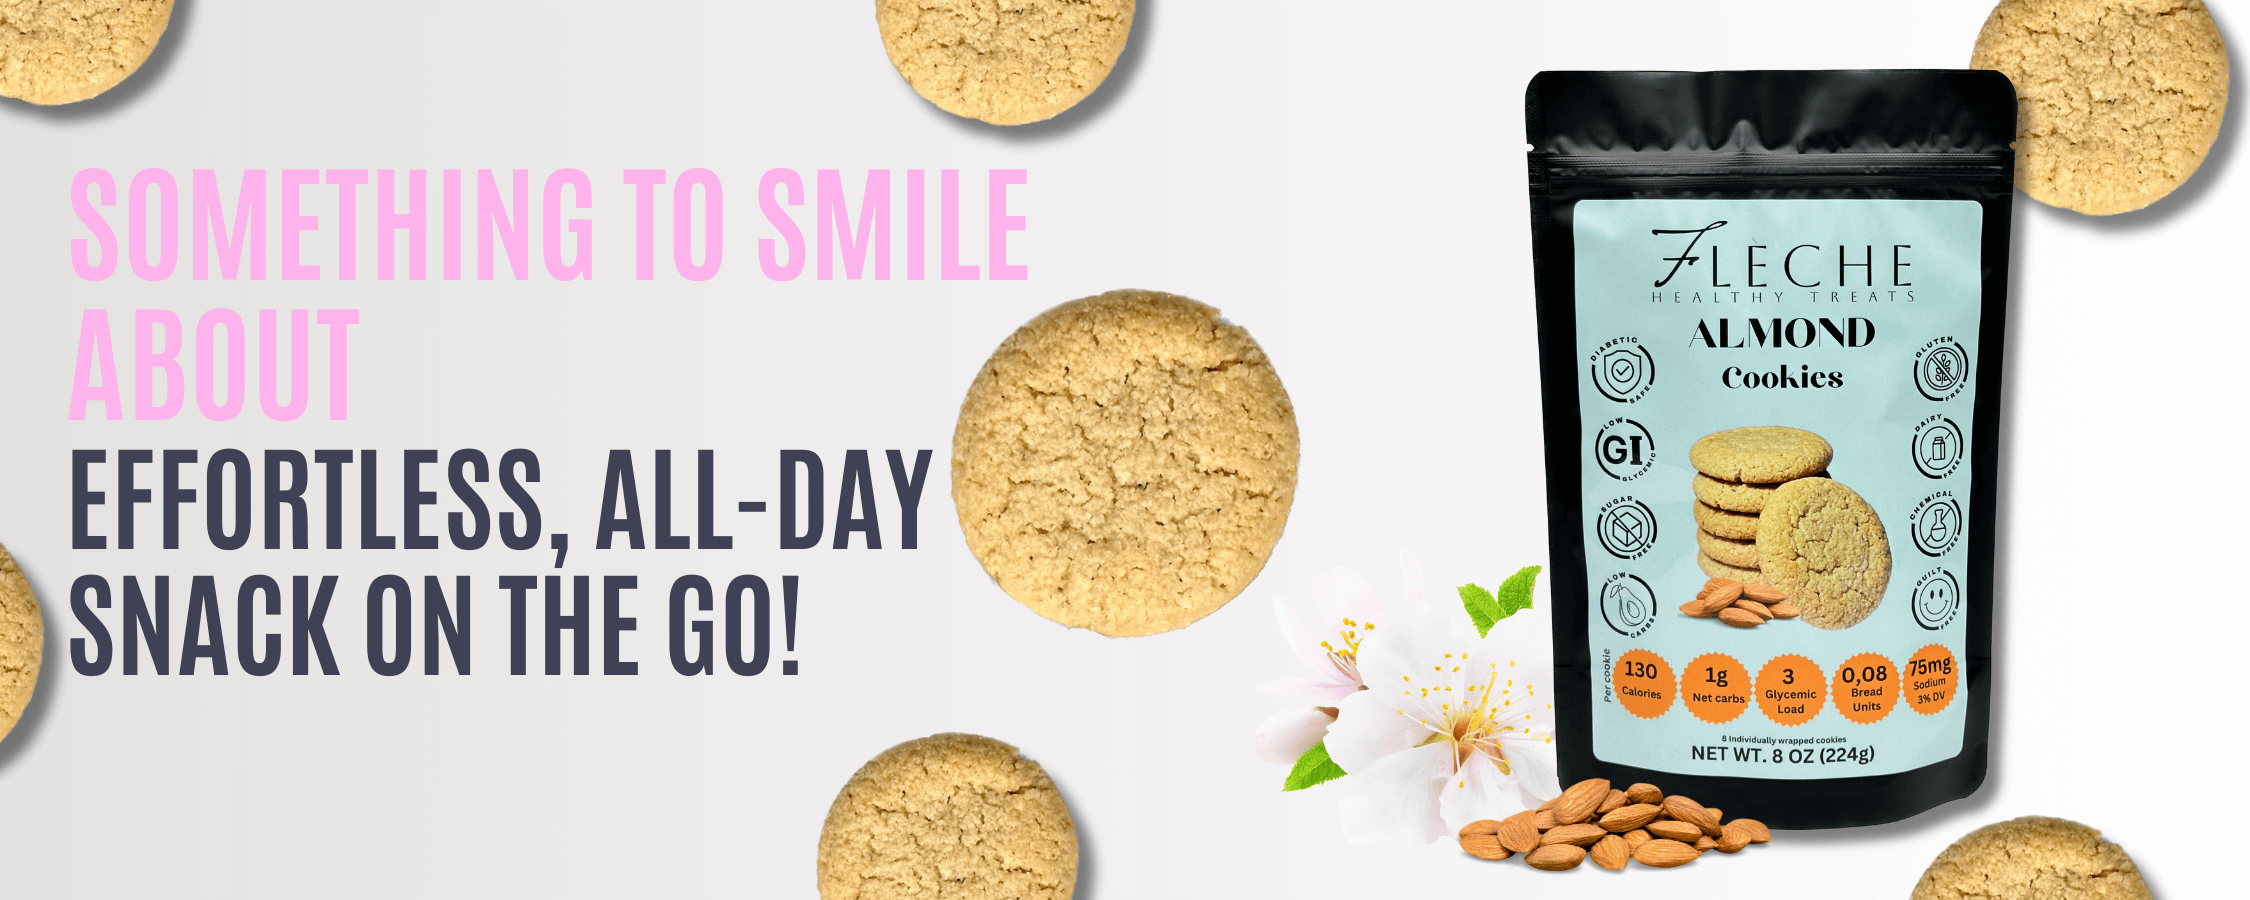 https://flechehealthytreats.com/cdn/shop/files/Something_to_smile_about_Effortless_all-day_snack_on_the_go_-2.png?v=1697571279&width=3840